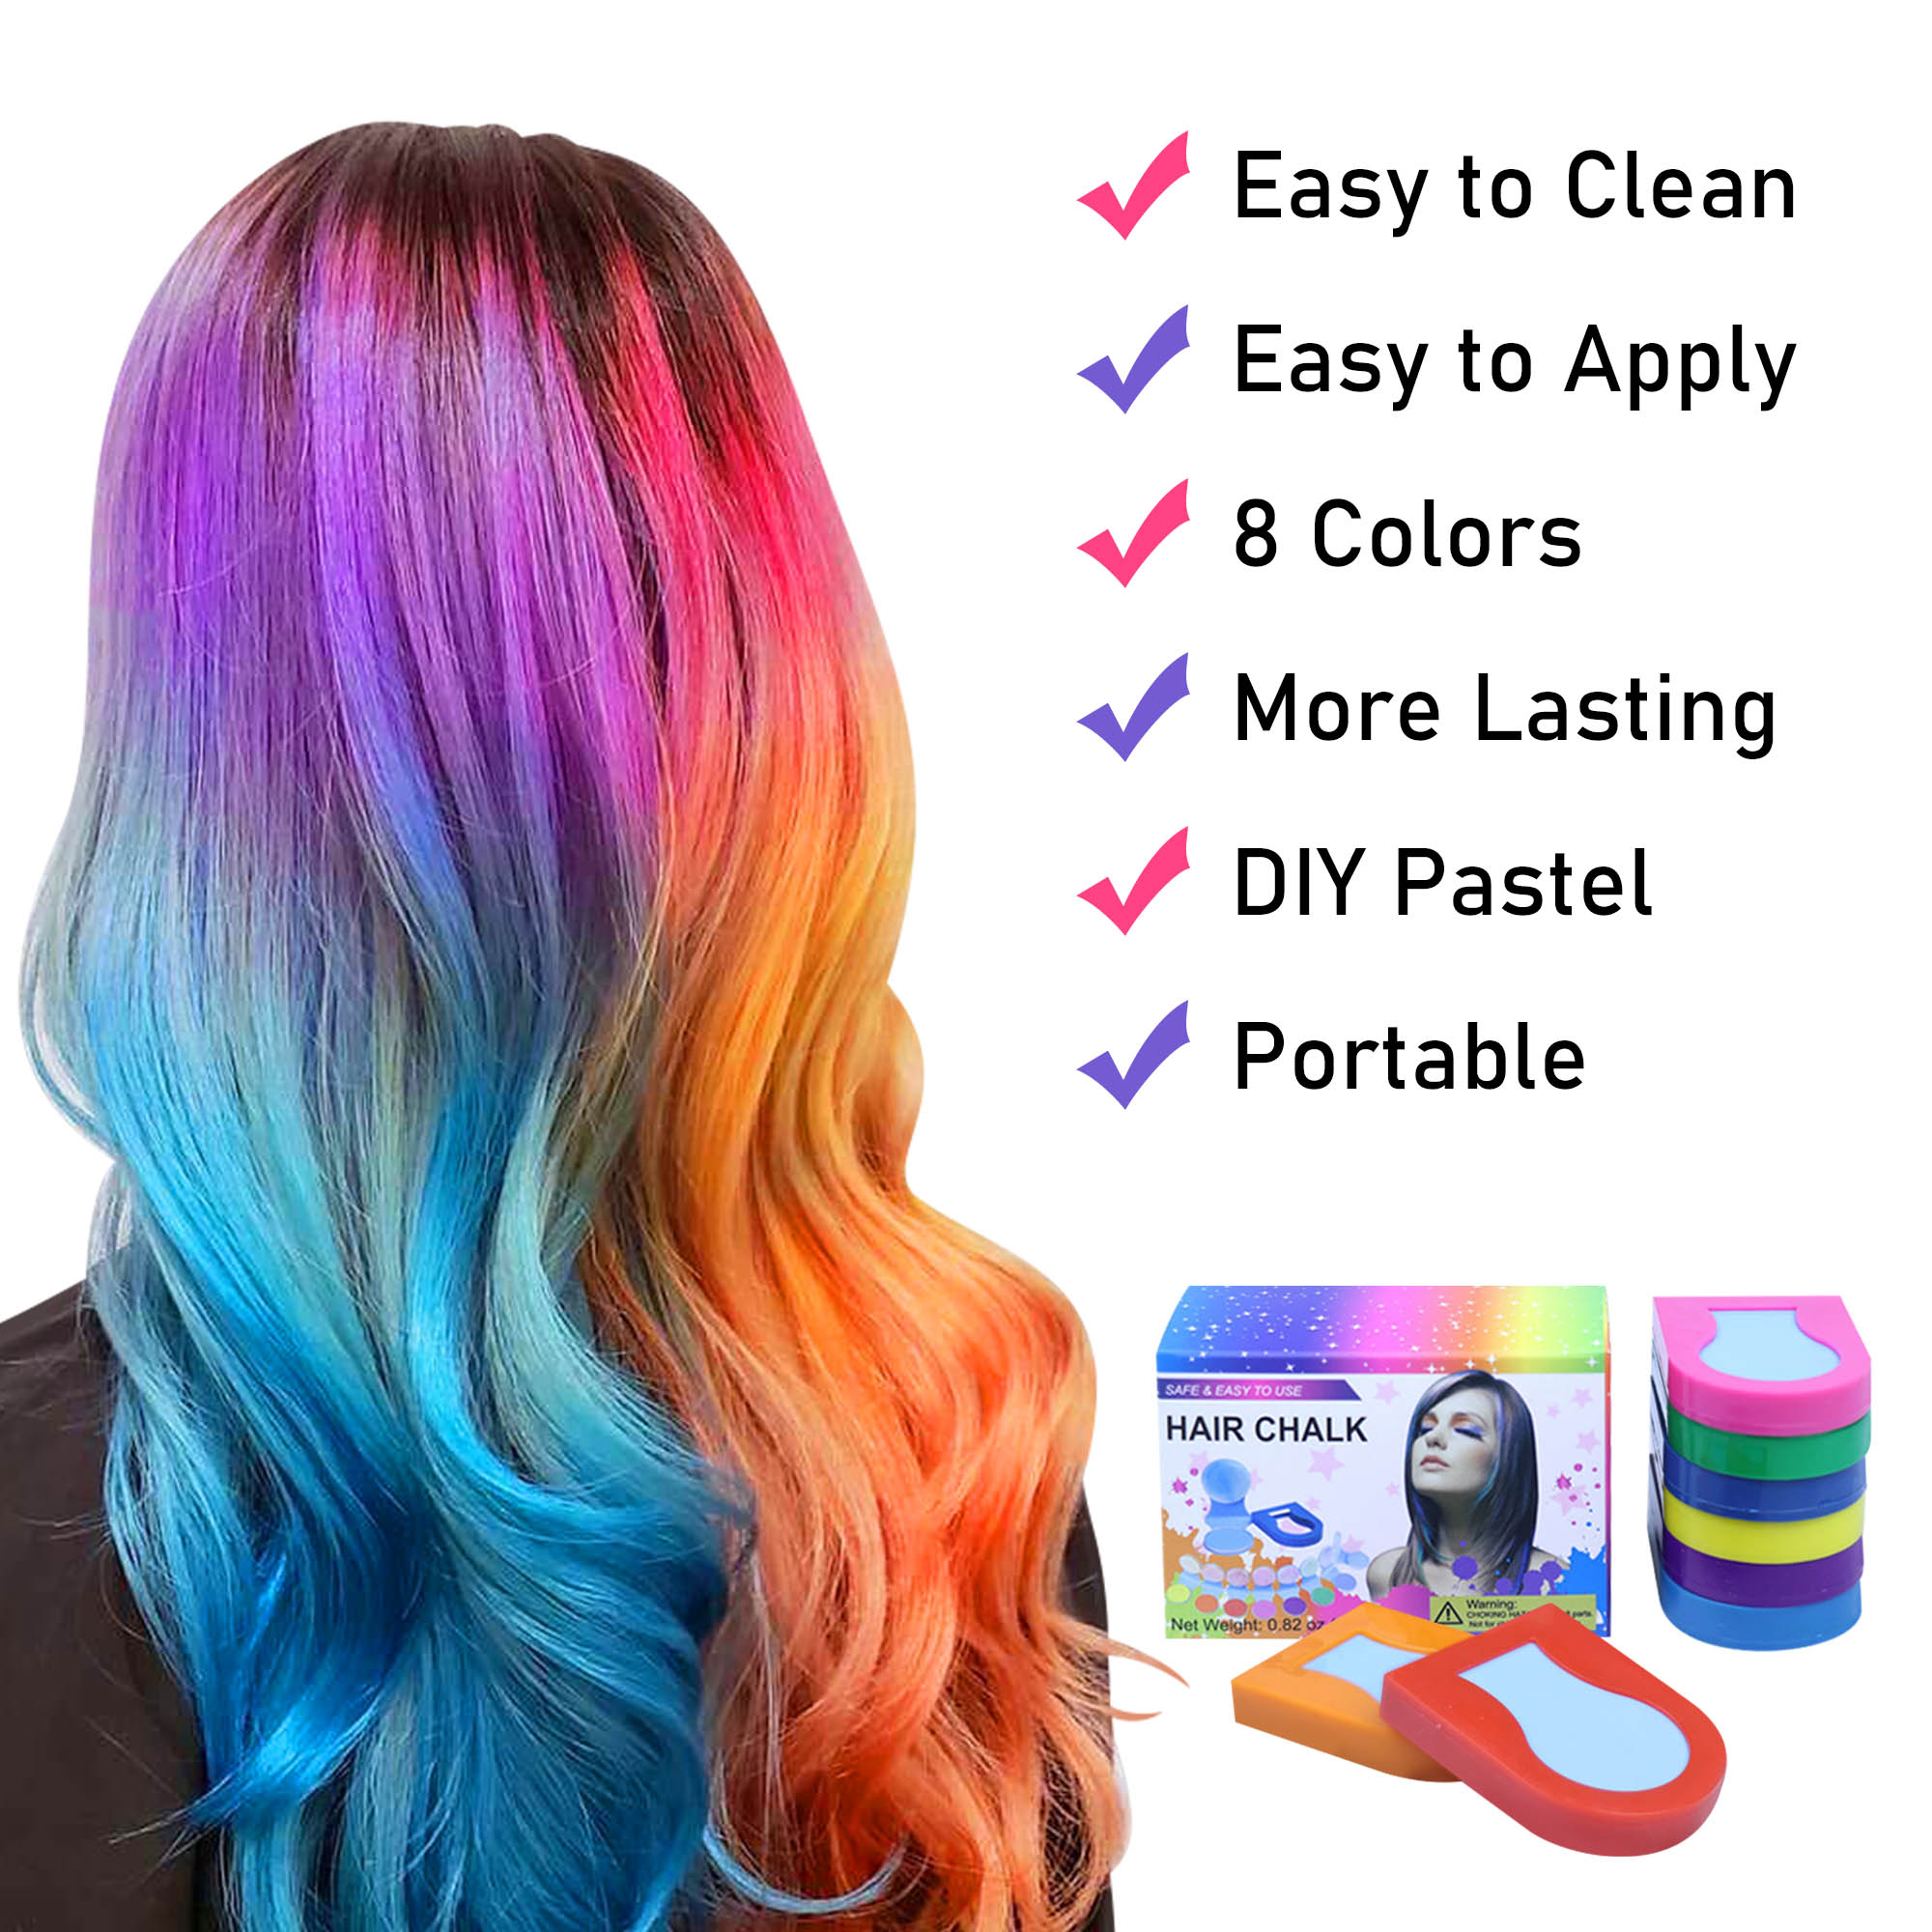 Hair Chalk Pinkiou Temporary Bright Hair Color Dye for Girls Kids, Washable Hair Chalk Set/Kit for Girls New Year Birthday Party Cosplay DIY - 8 Colors - image 4 of 10